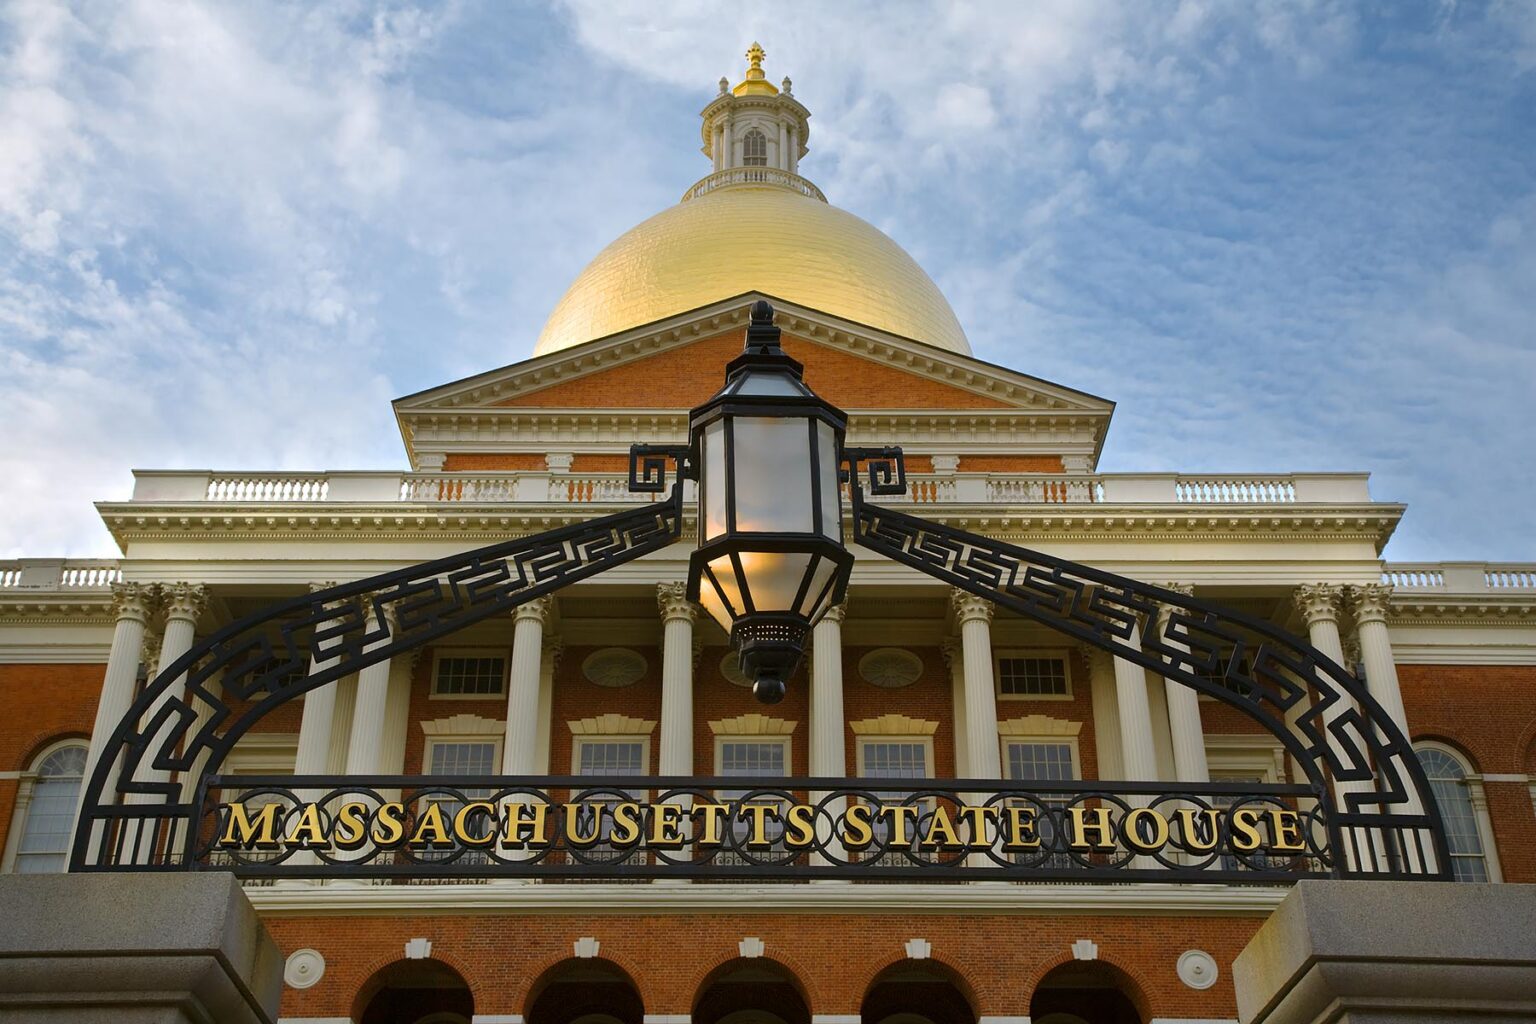 Located on BEACON HILL, the MASSACHUSETTS STATE HOUSE contains the legislature and Governors residence - BOSTON, MASSACHUSETTS